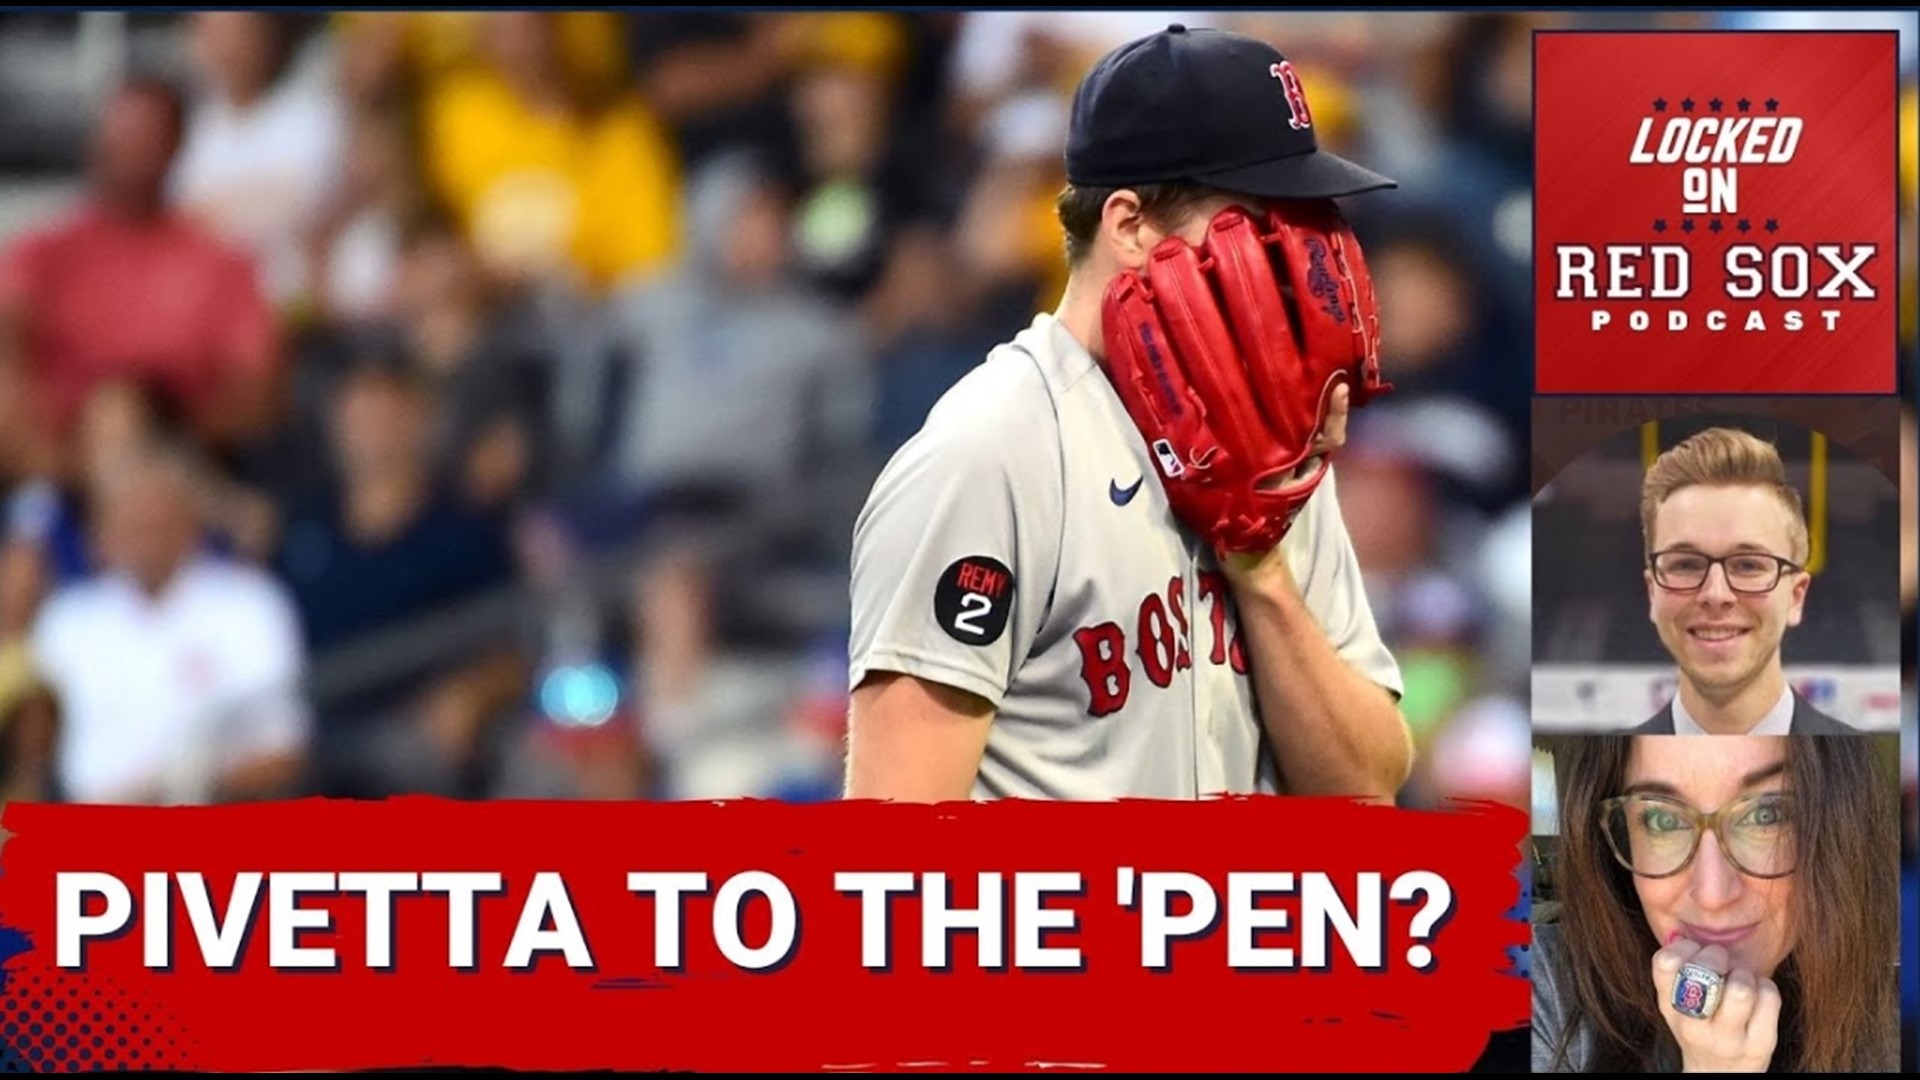 Nick Pivetta has been struggling for the Red Sox in 2023